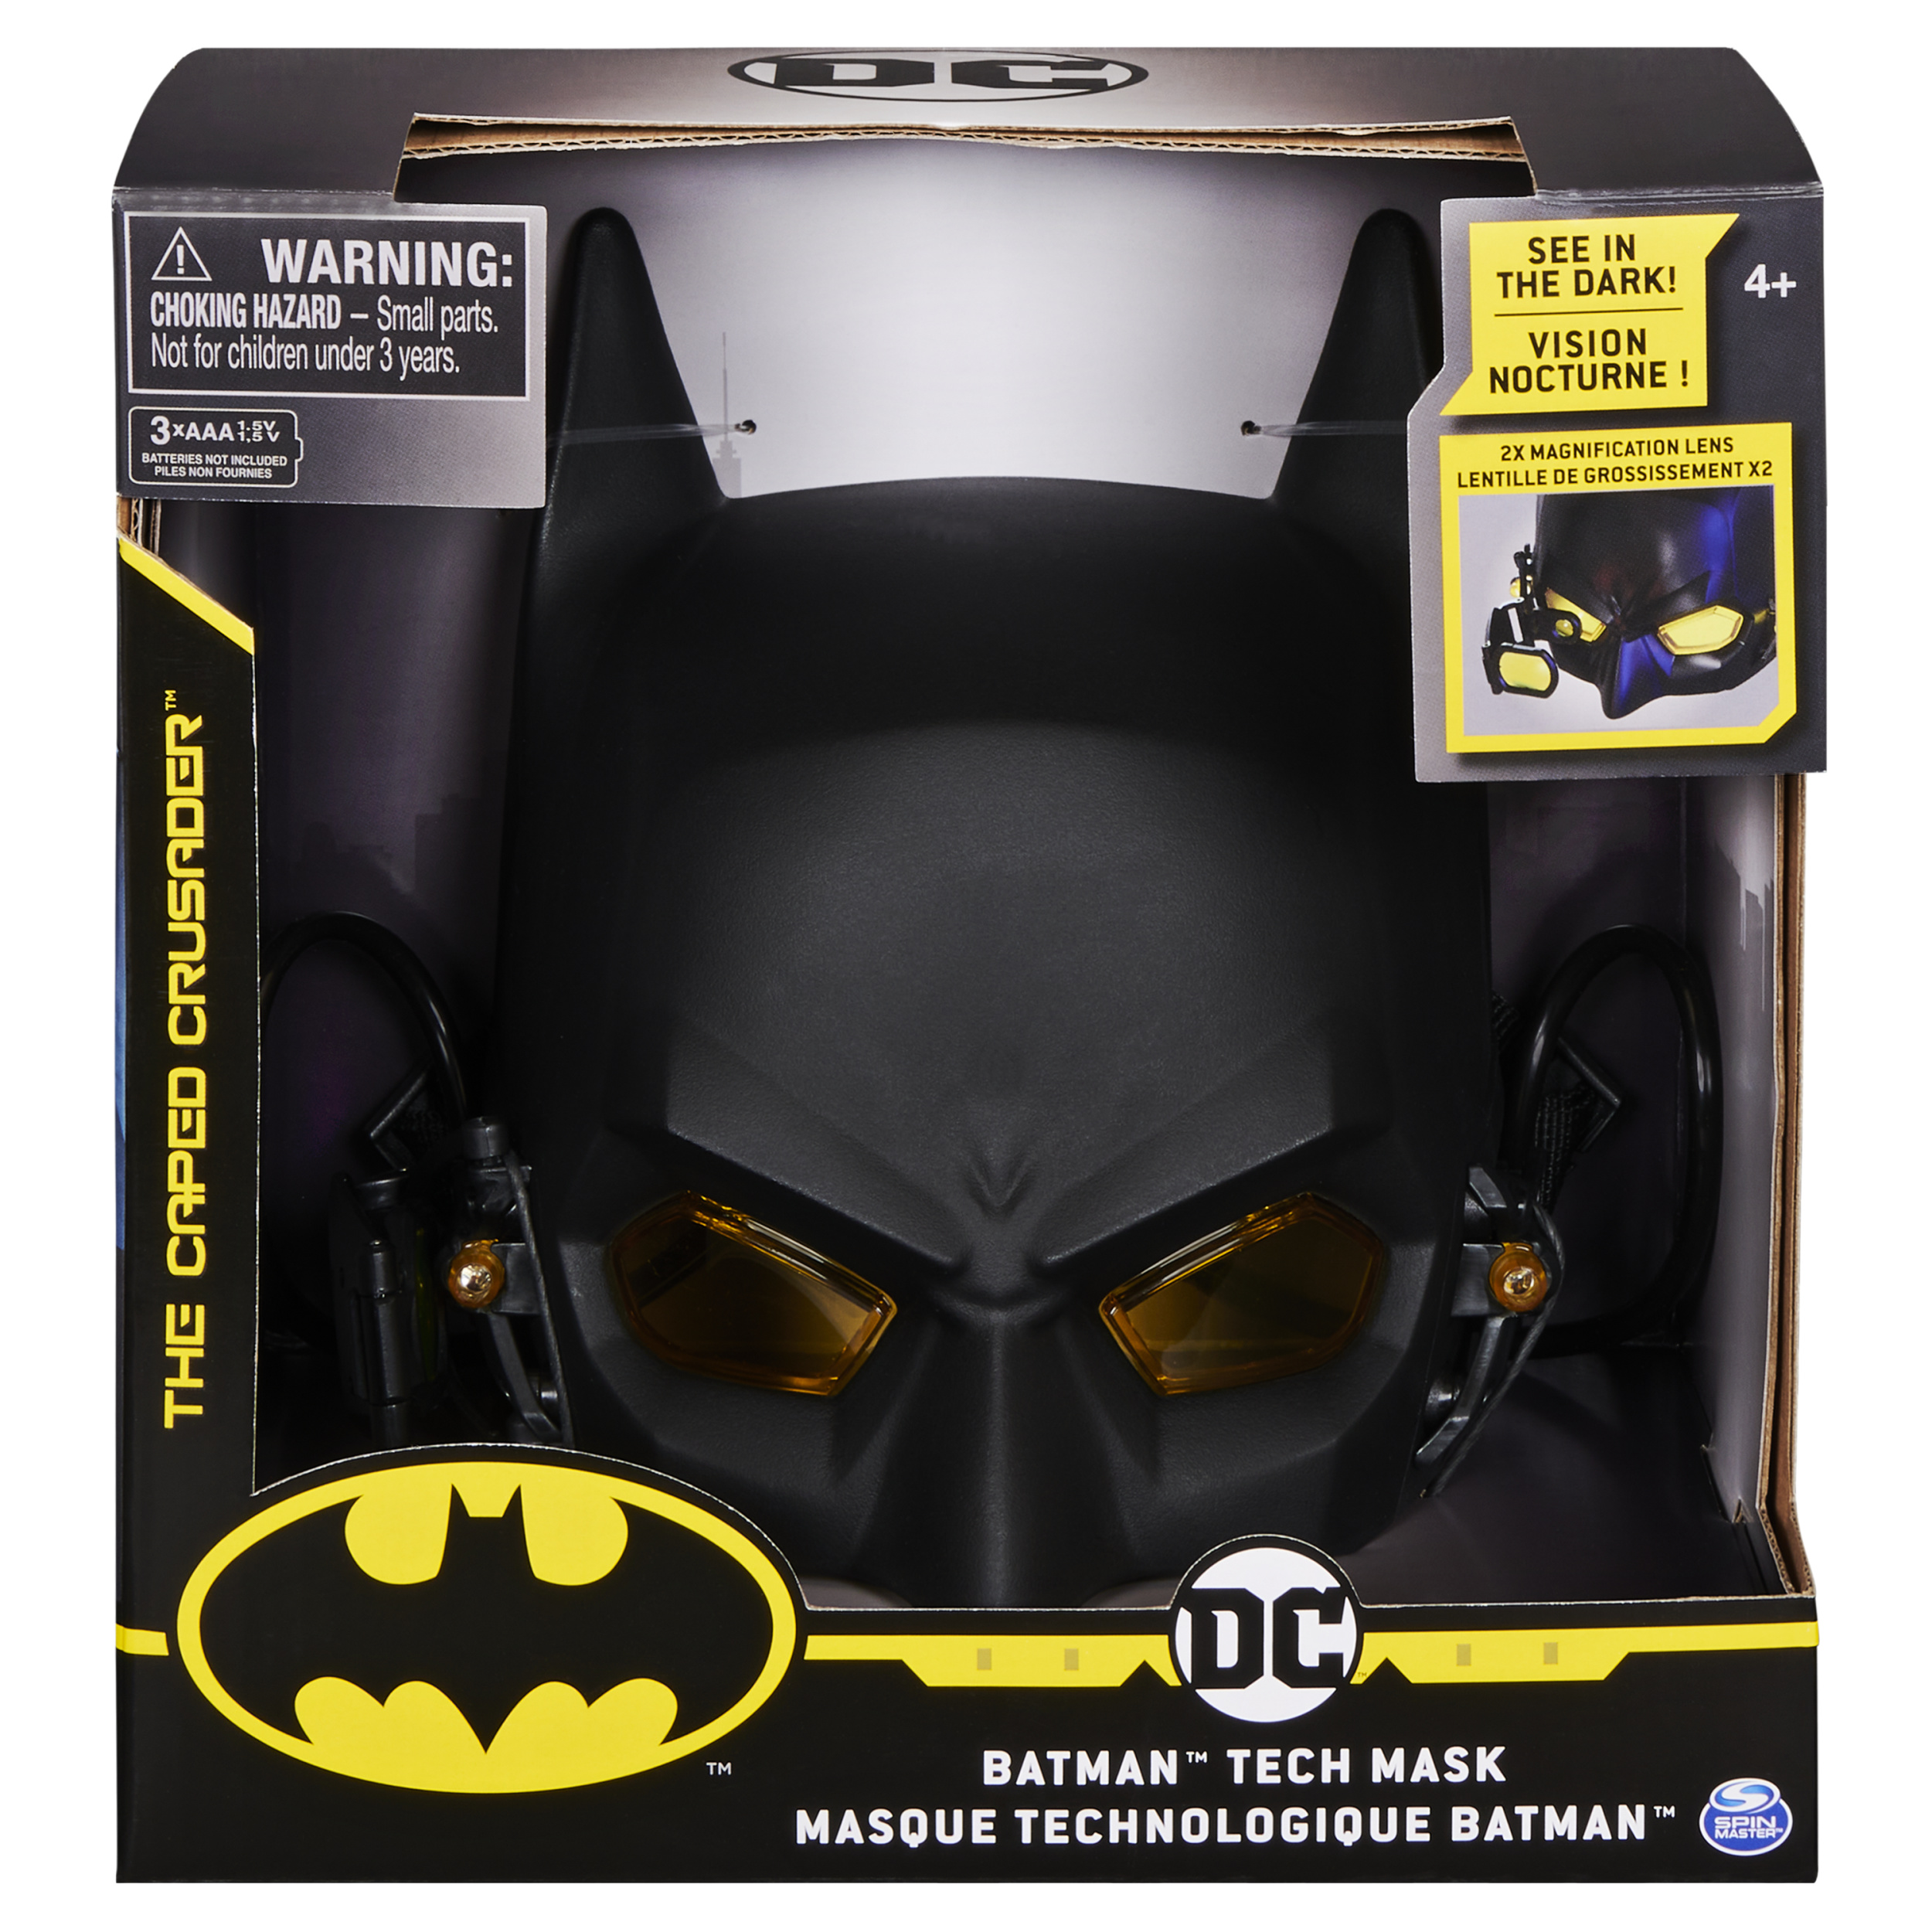 Batman Role-Play Tech Mask with Lights and Magnification Lens, for Kids Aged 4 and up - image 2 of 7